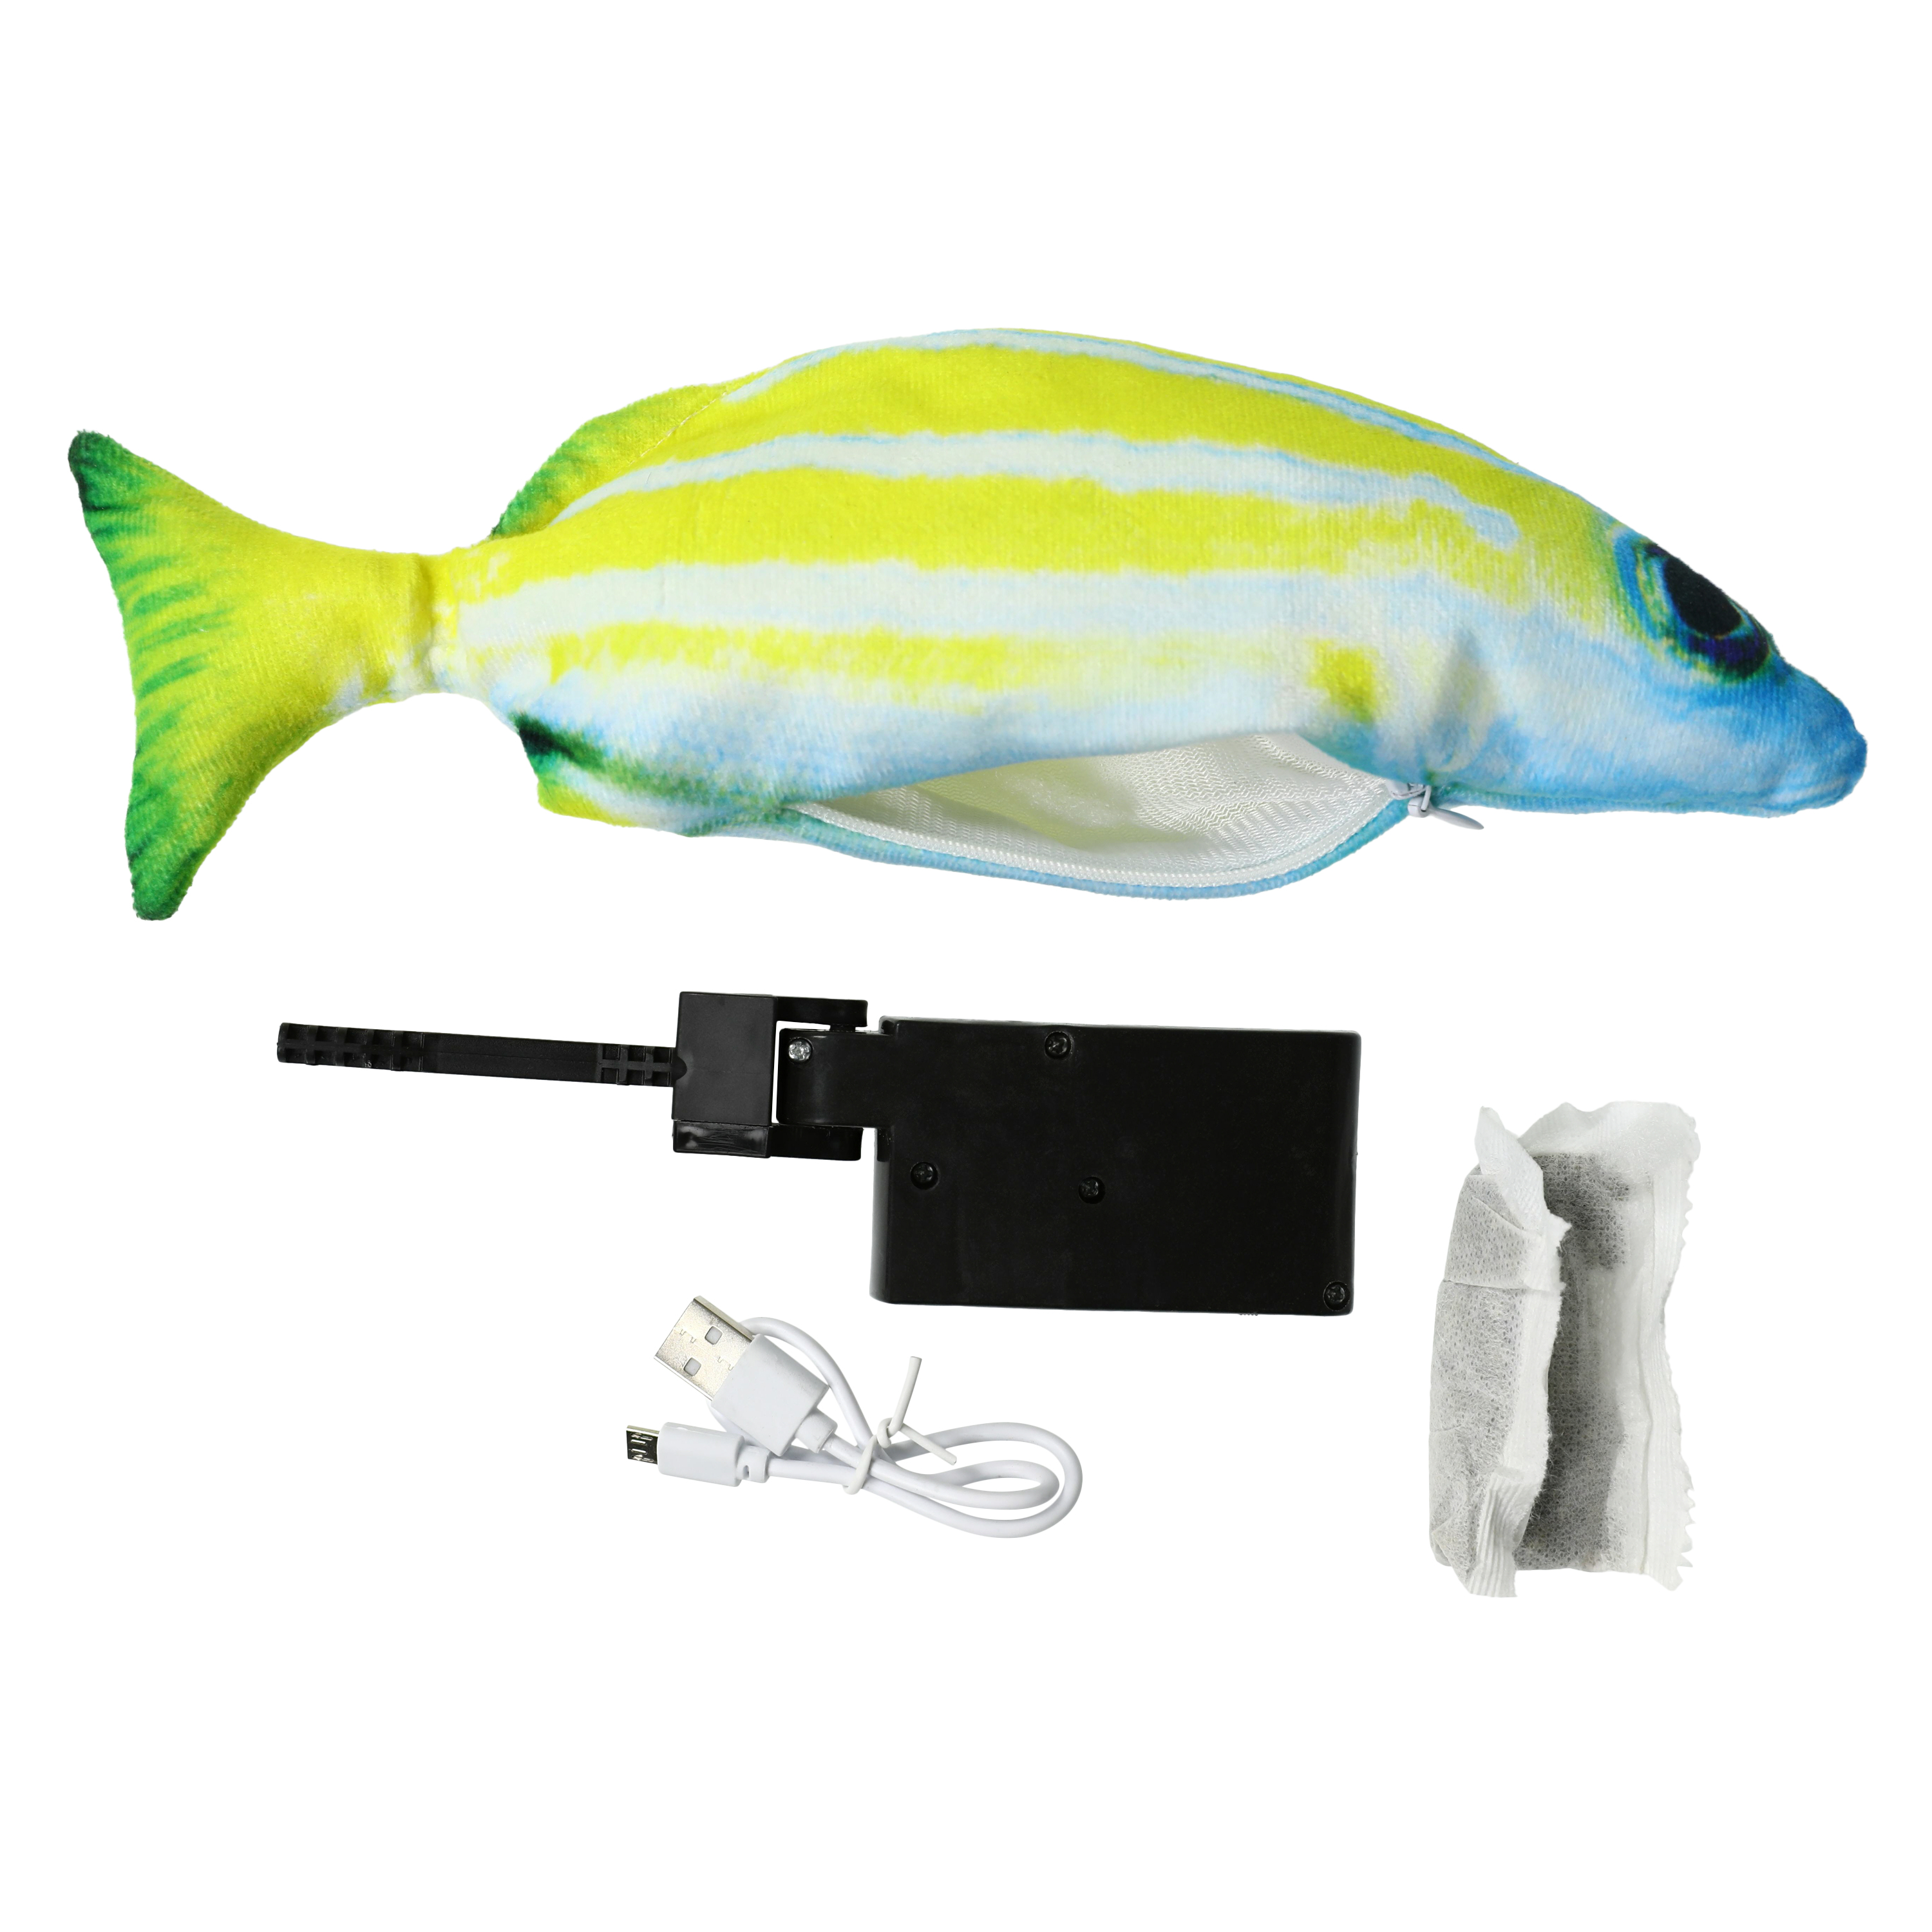 Flippy Floppy Flapping Fish and Fishing Rod for Cats.